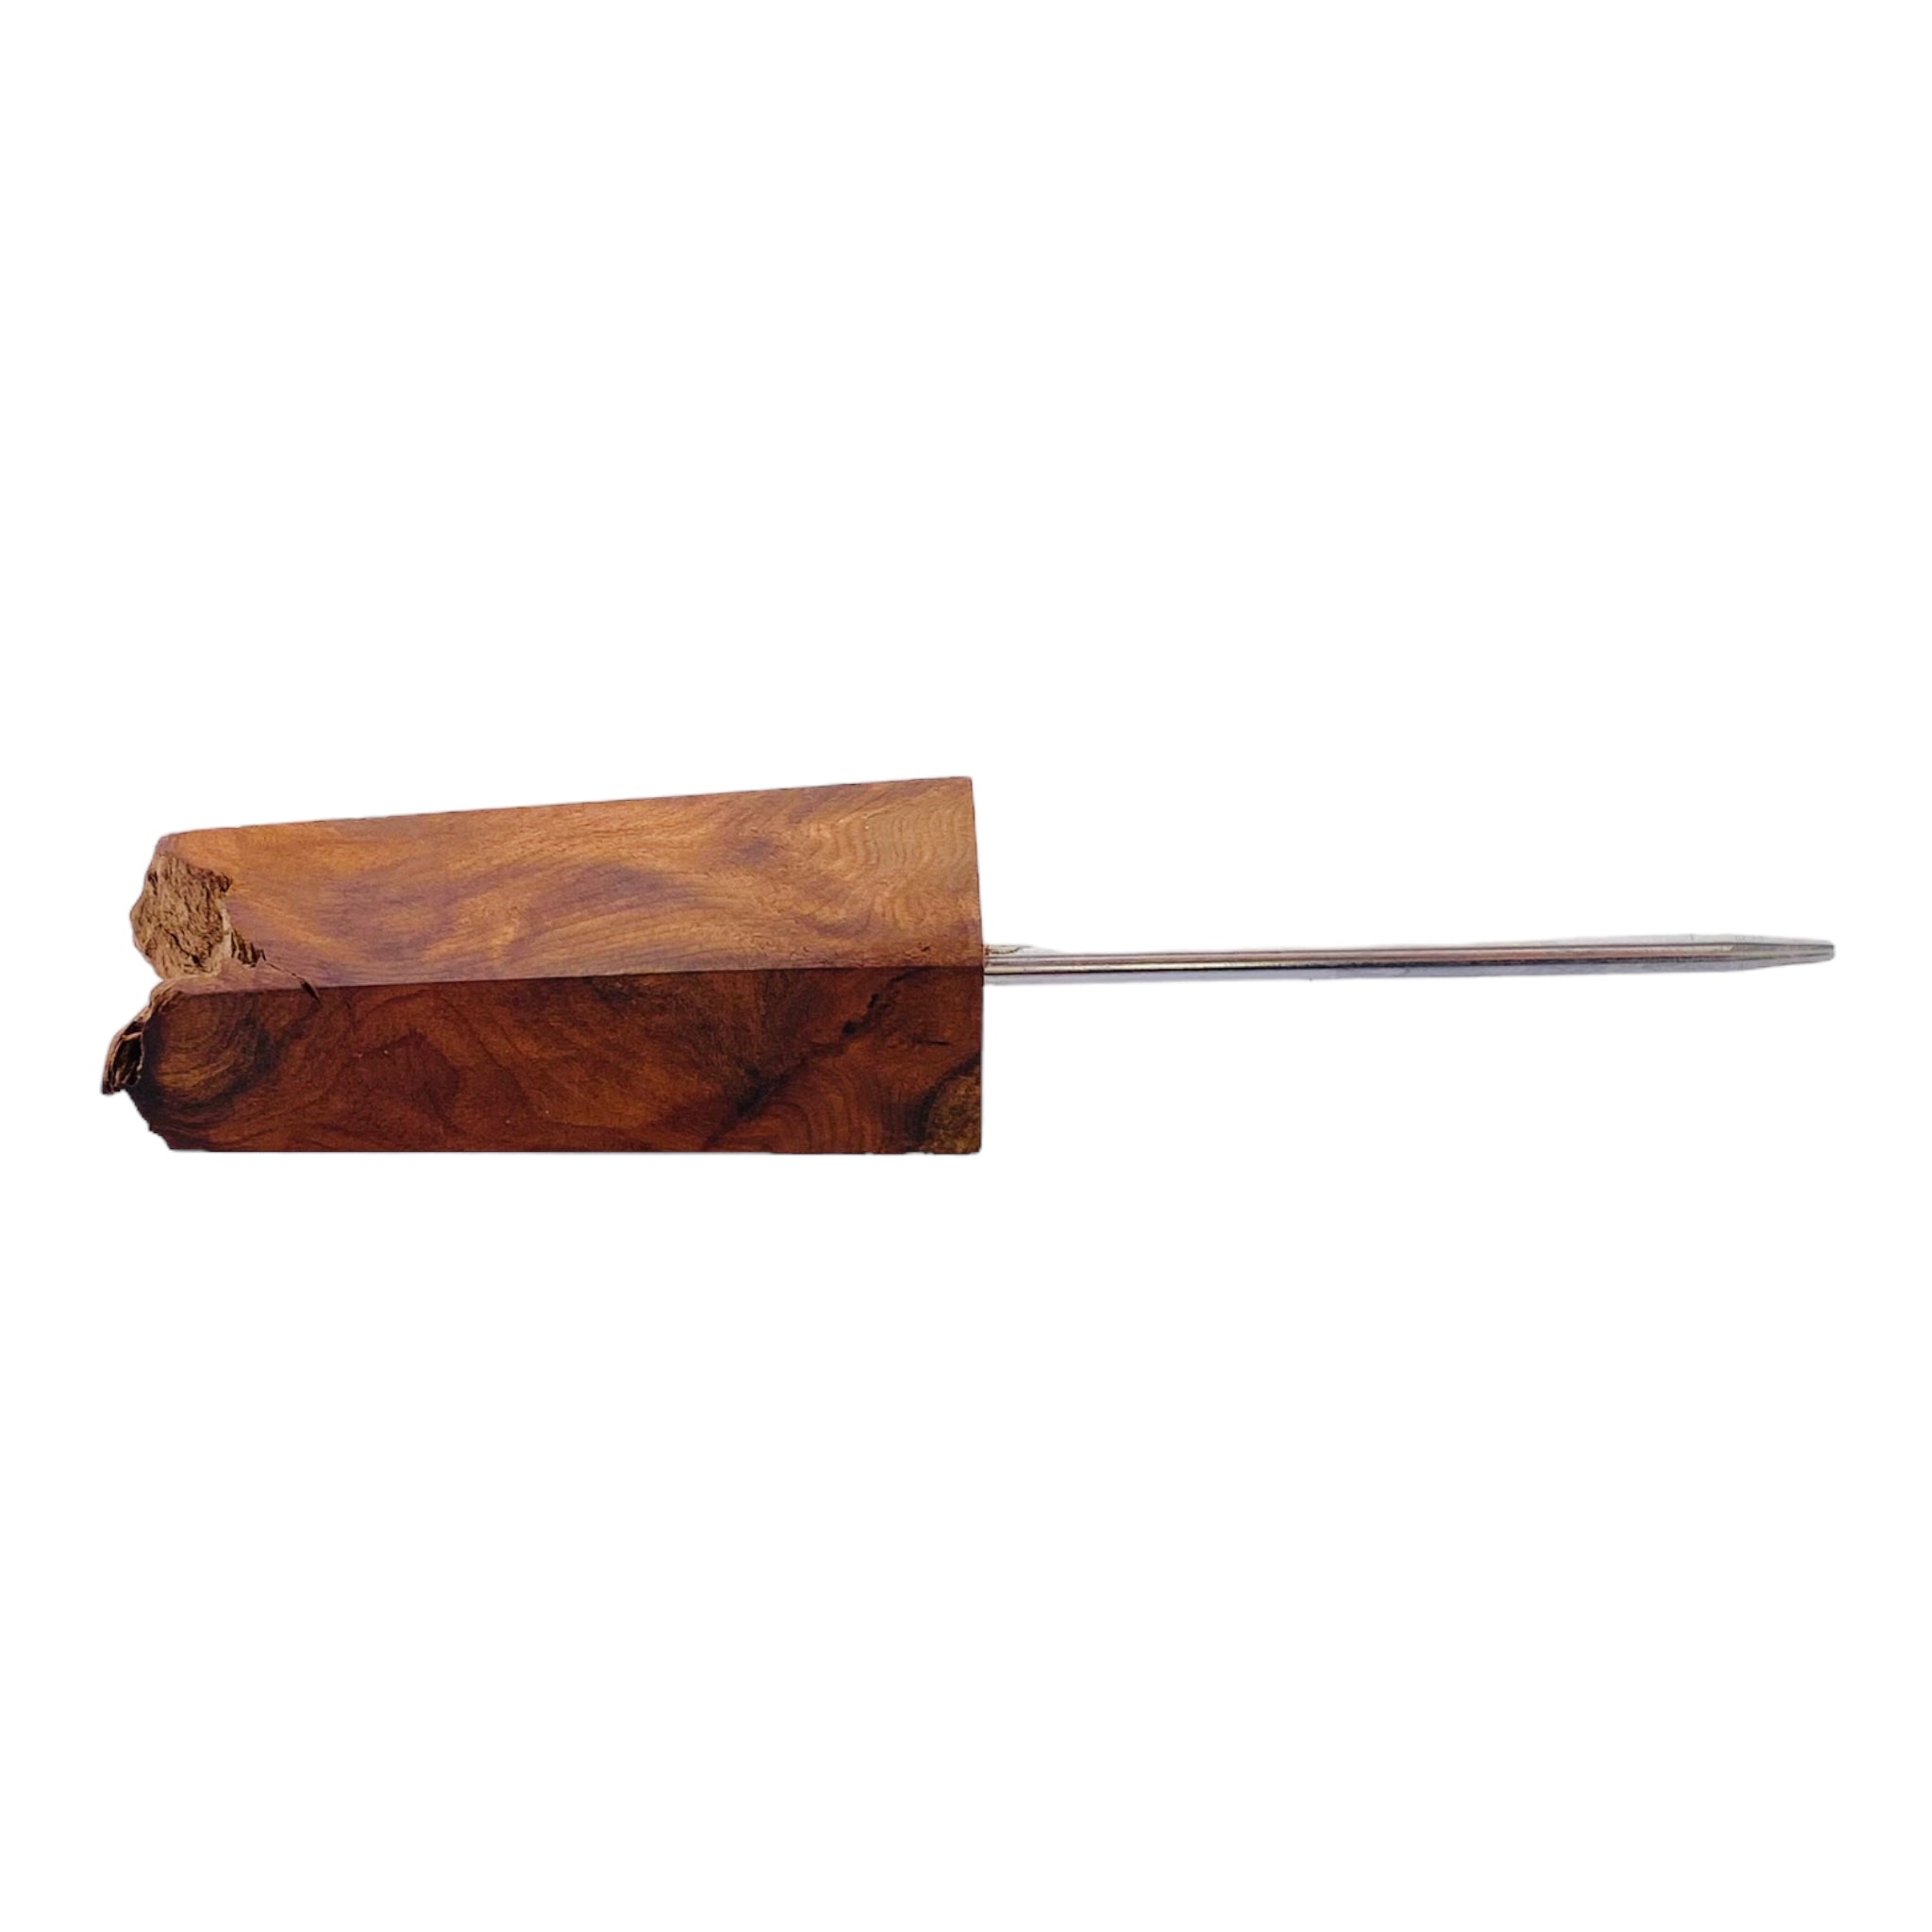 Valhalla Wooden Dab Tools (Assorted Colors) - SSG - $9.99